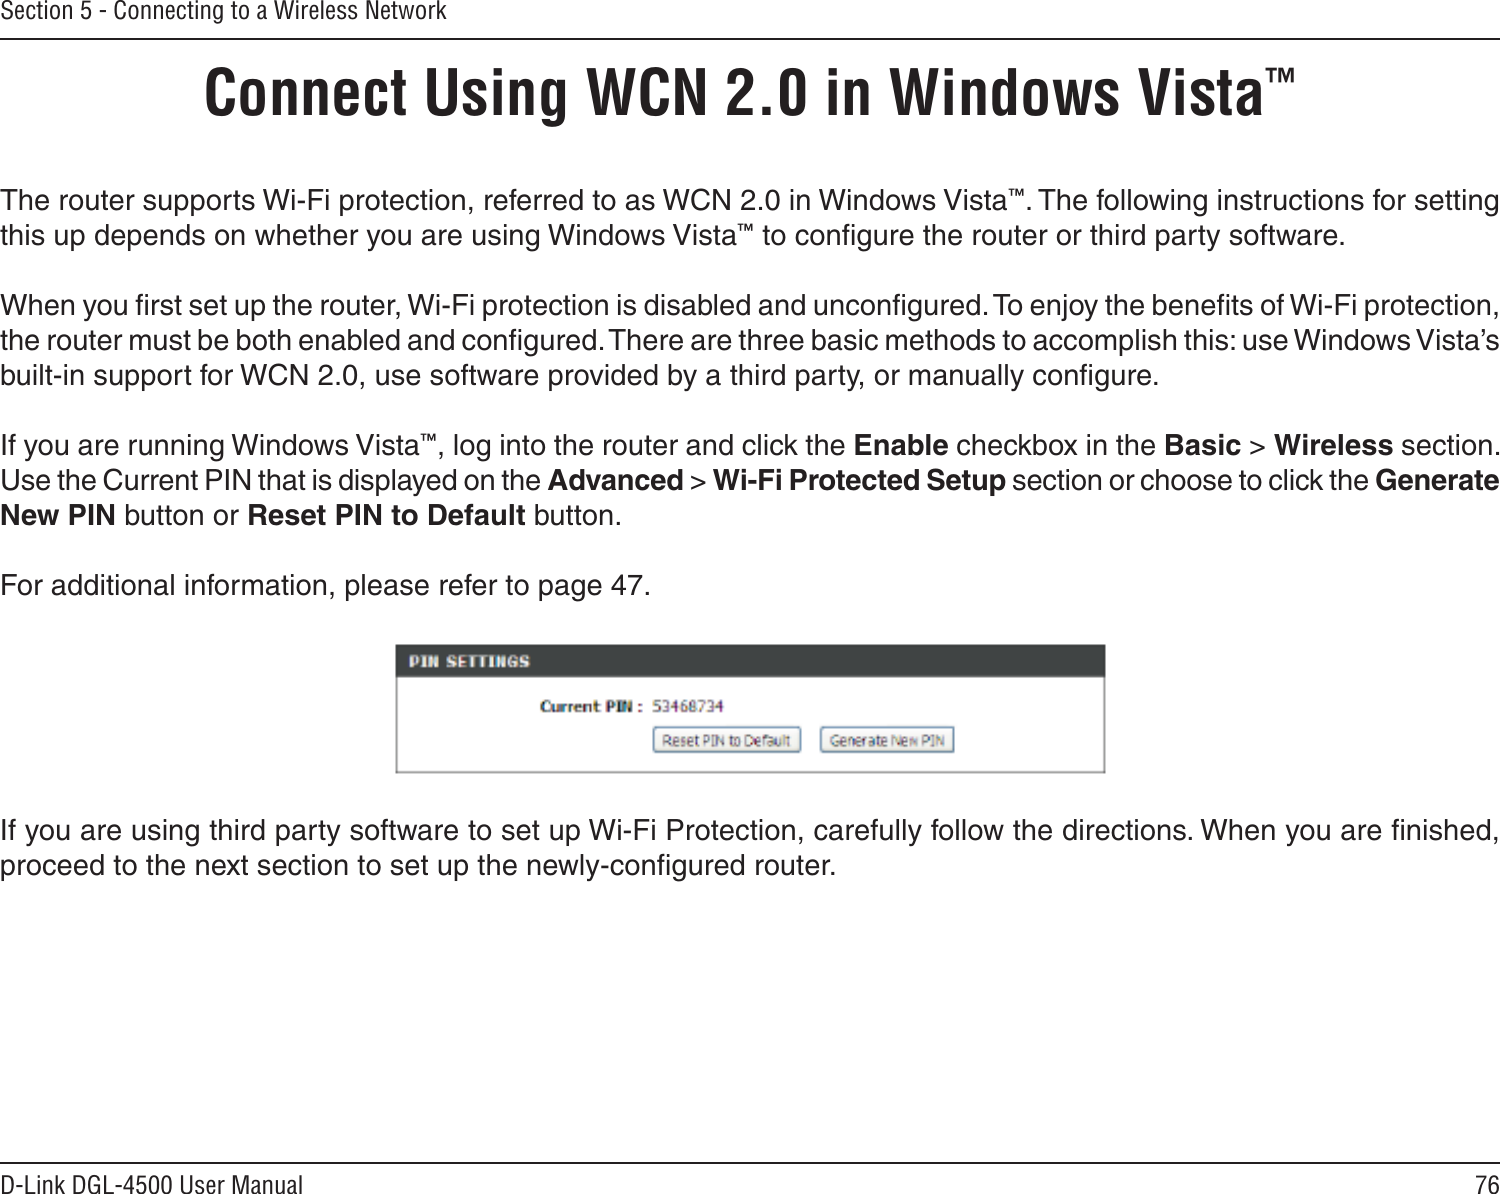 76D-Link DGL-4500 User ManualSection 5 - Connecting to a Wireless NetworkConnect Using WCN 2.0 in Windows Vista™ The router supports Wi-Fi protection, referred to as WCN 2.0 in Windows Vista™. The following instructions for setting this up depends on whether you are using Windows Vista™ to conﬁgure the router or third party software.        When you ﬁrst set up the router, Wi-Fi protection is disabled and unconﬁgured. To enjoy the beneﬁts of Wi-Fi protection, the router must be both enabled and conﬁgured. There are three basic methods to accomplish this: use Windows Vista’s built-in support for WCN 2.0, use software provided by a third party, or manually conﬁgure. If you are running Windows Vista™, log into the router and click the Enable checkbox in the Basic &gt; Wireless section. Use the Current PIN that is displayed on the Advanced &gt; Wi-Fi Protected Setup section or choose to click the Generate New PIN button or Reset PIN to Default button. For additional information, please refer to page 47.If you are using third party software to set up Wi-Fi Protection, carefully follow the directions. When you are ﬁnished, proceed to the next section to set up the newly-conﬁgured router. 